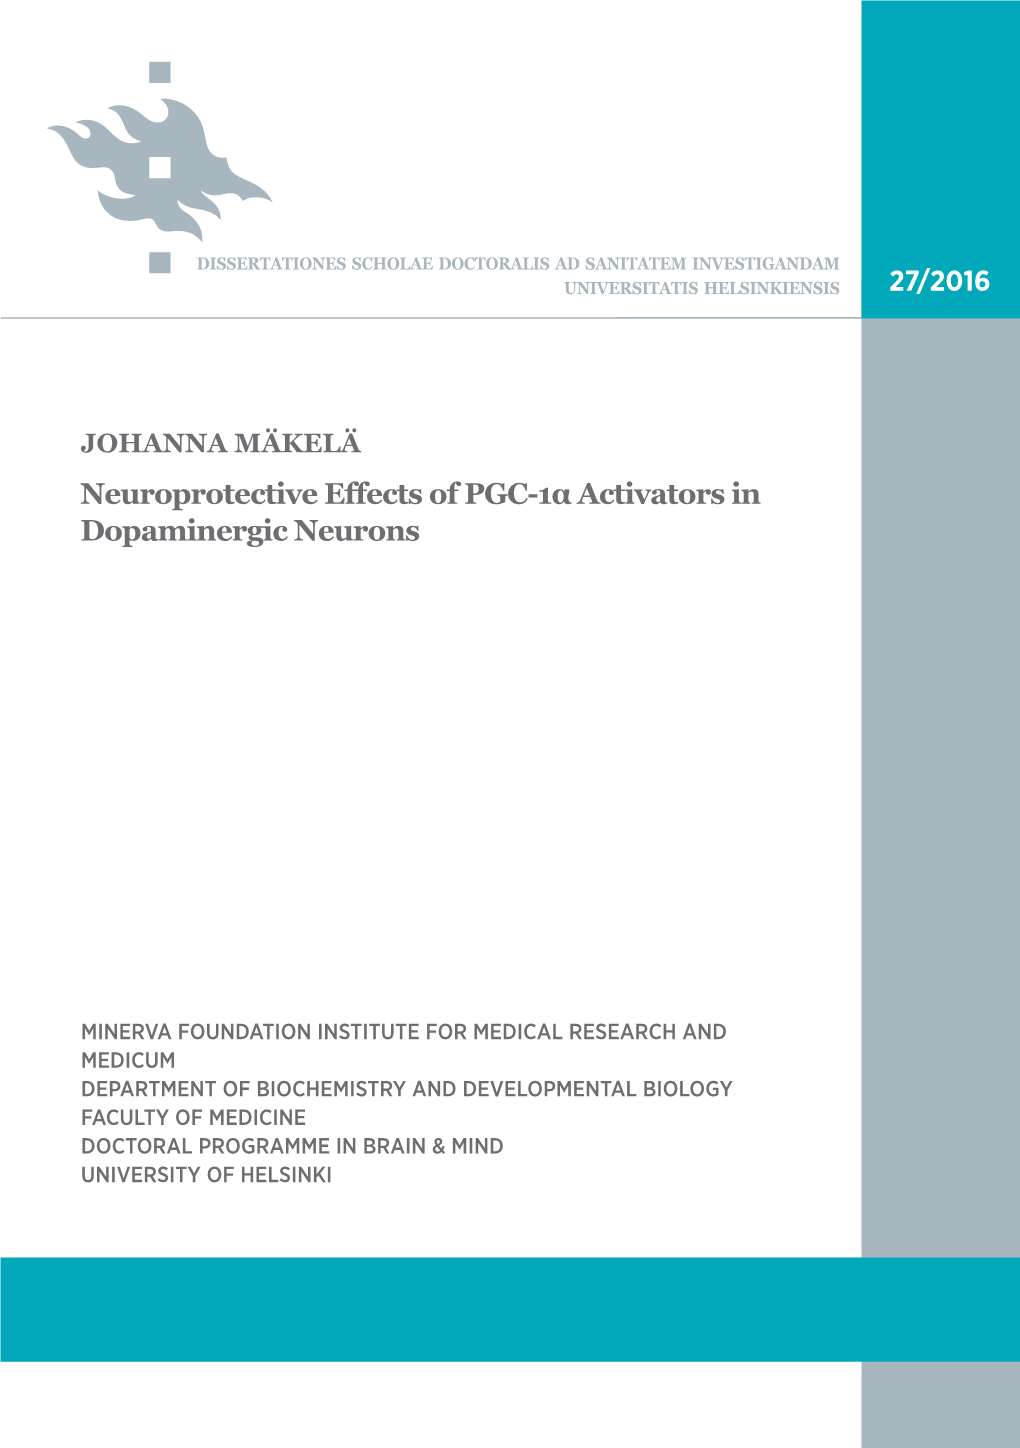 Neuroprotective Effects of PGC-1Α Activators in Dopaminergic Neurons JOHANNA MÄKELÄ Recent Publications in This Series